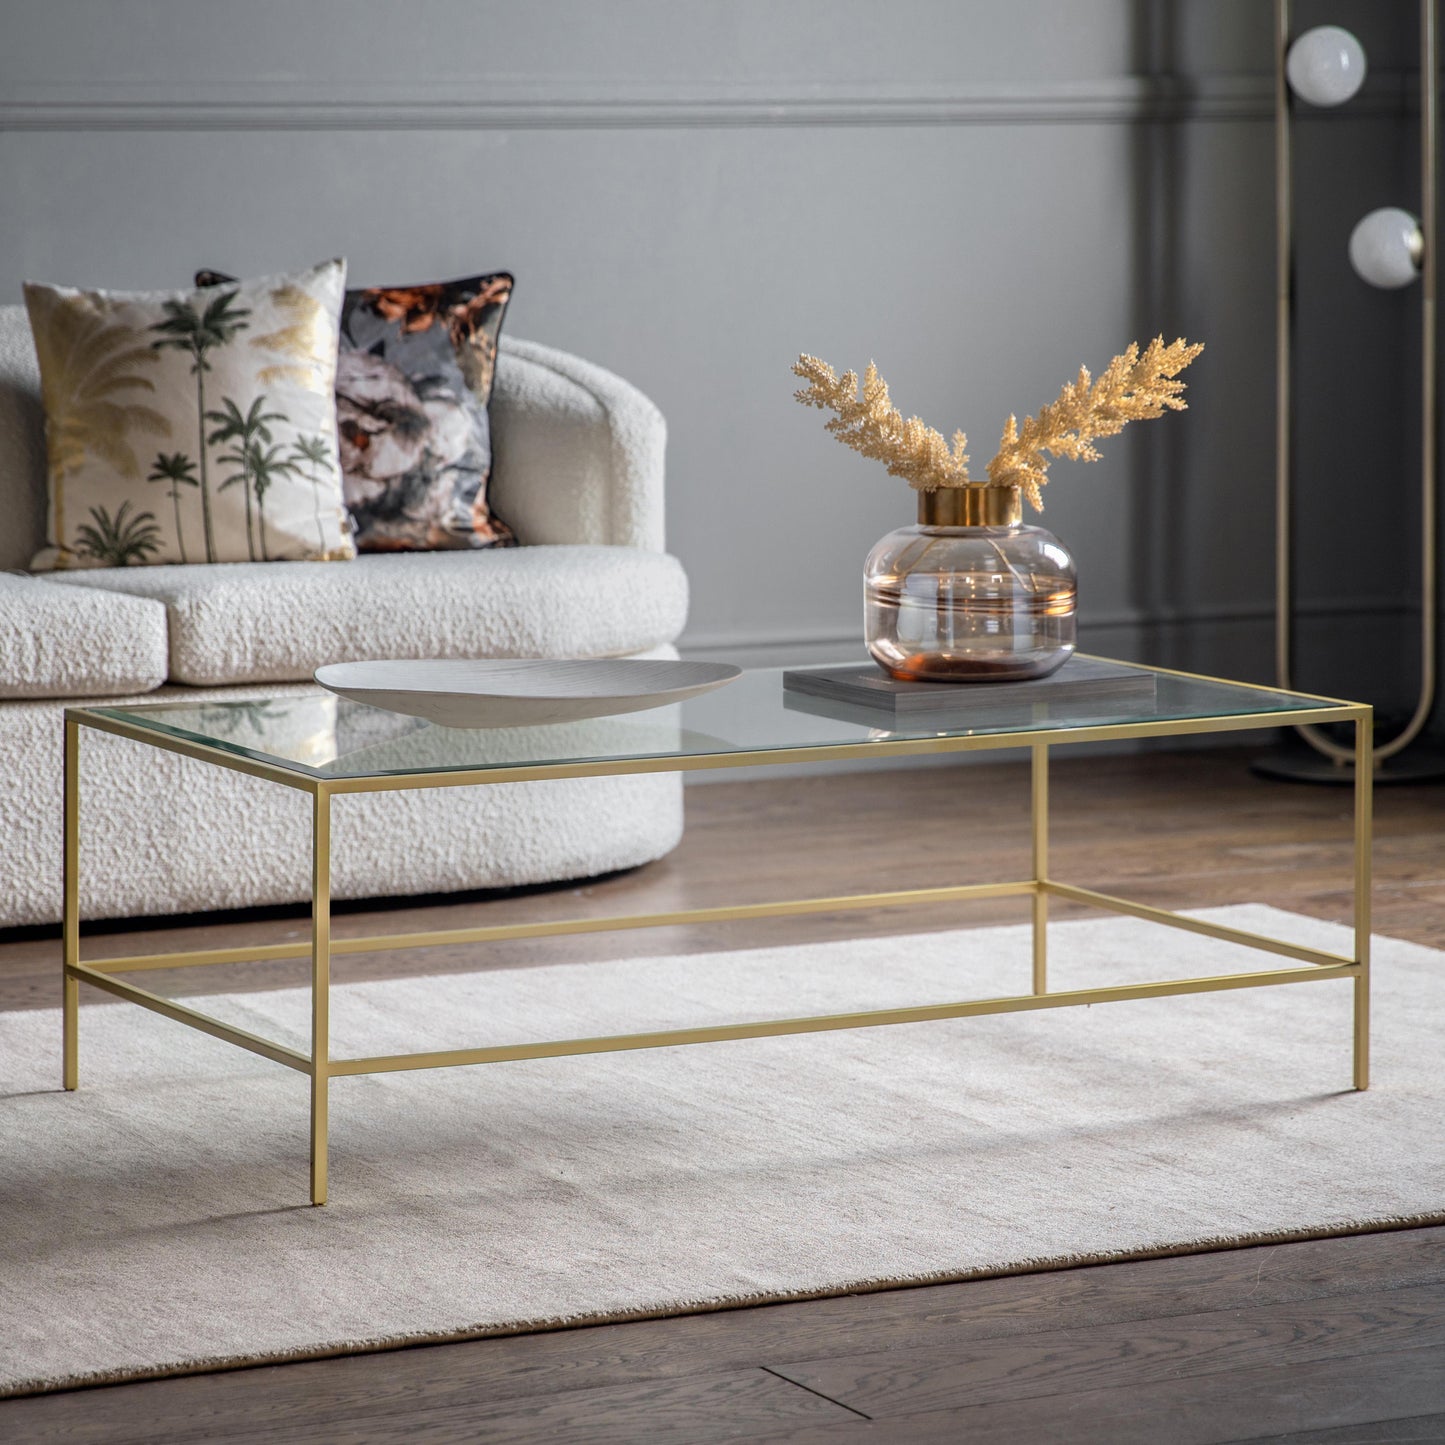 A stylish Engleborne Coffee Table Champagne 1200x650x400mm by Kikiathome.co.uk adds elegance to any living room, complementing the interior decor and home furniture.